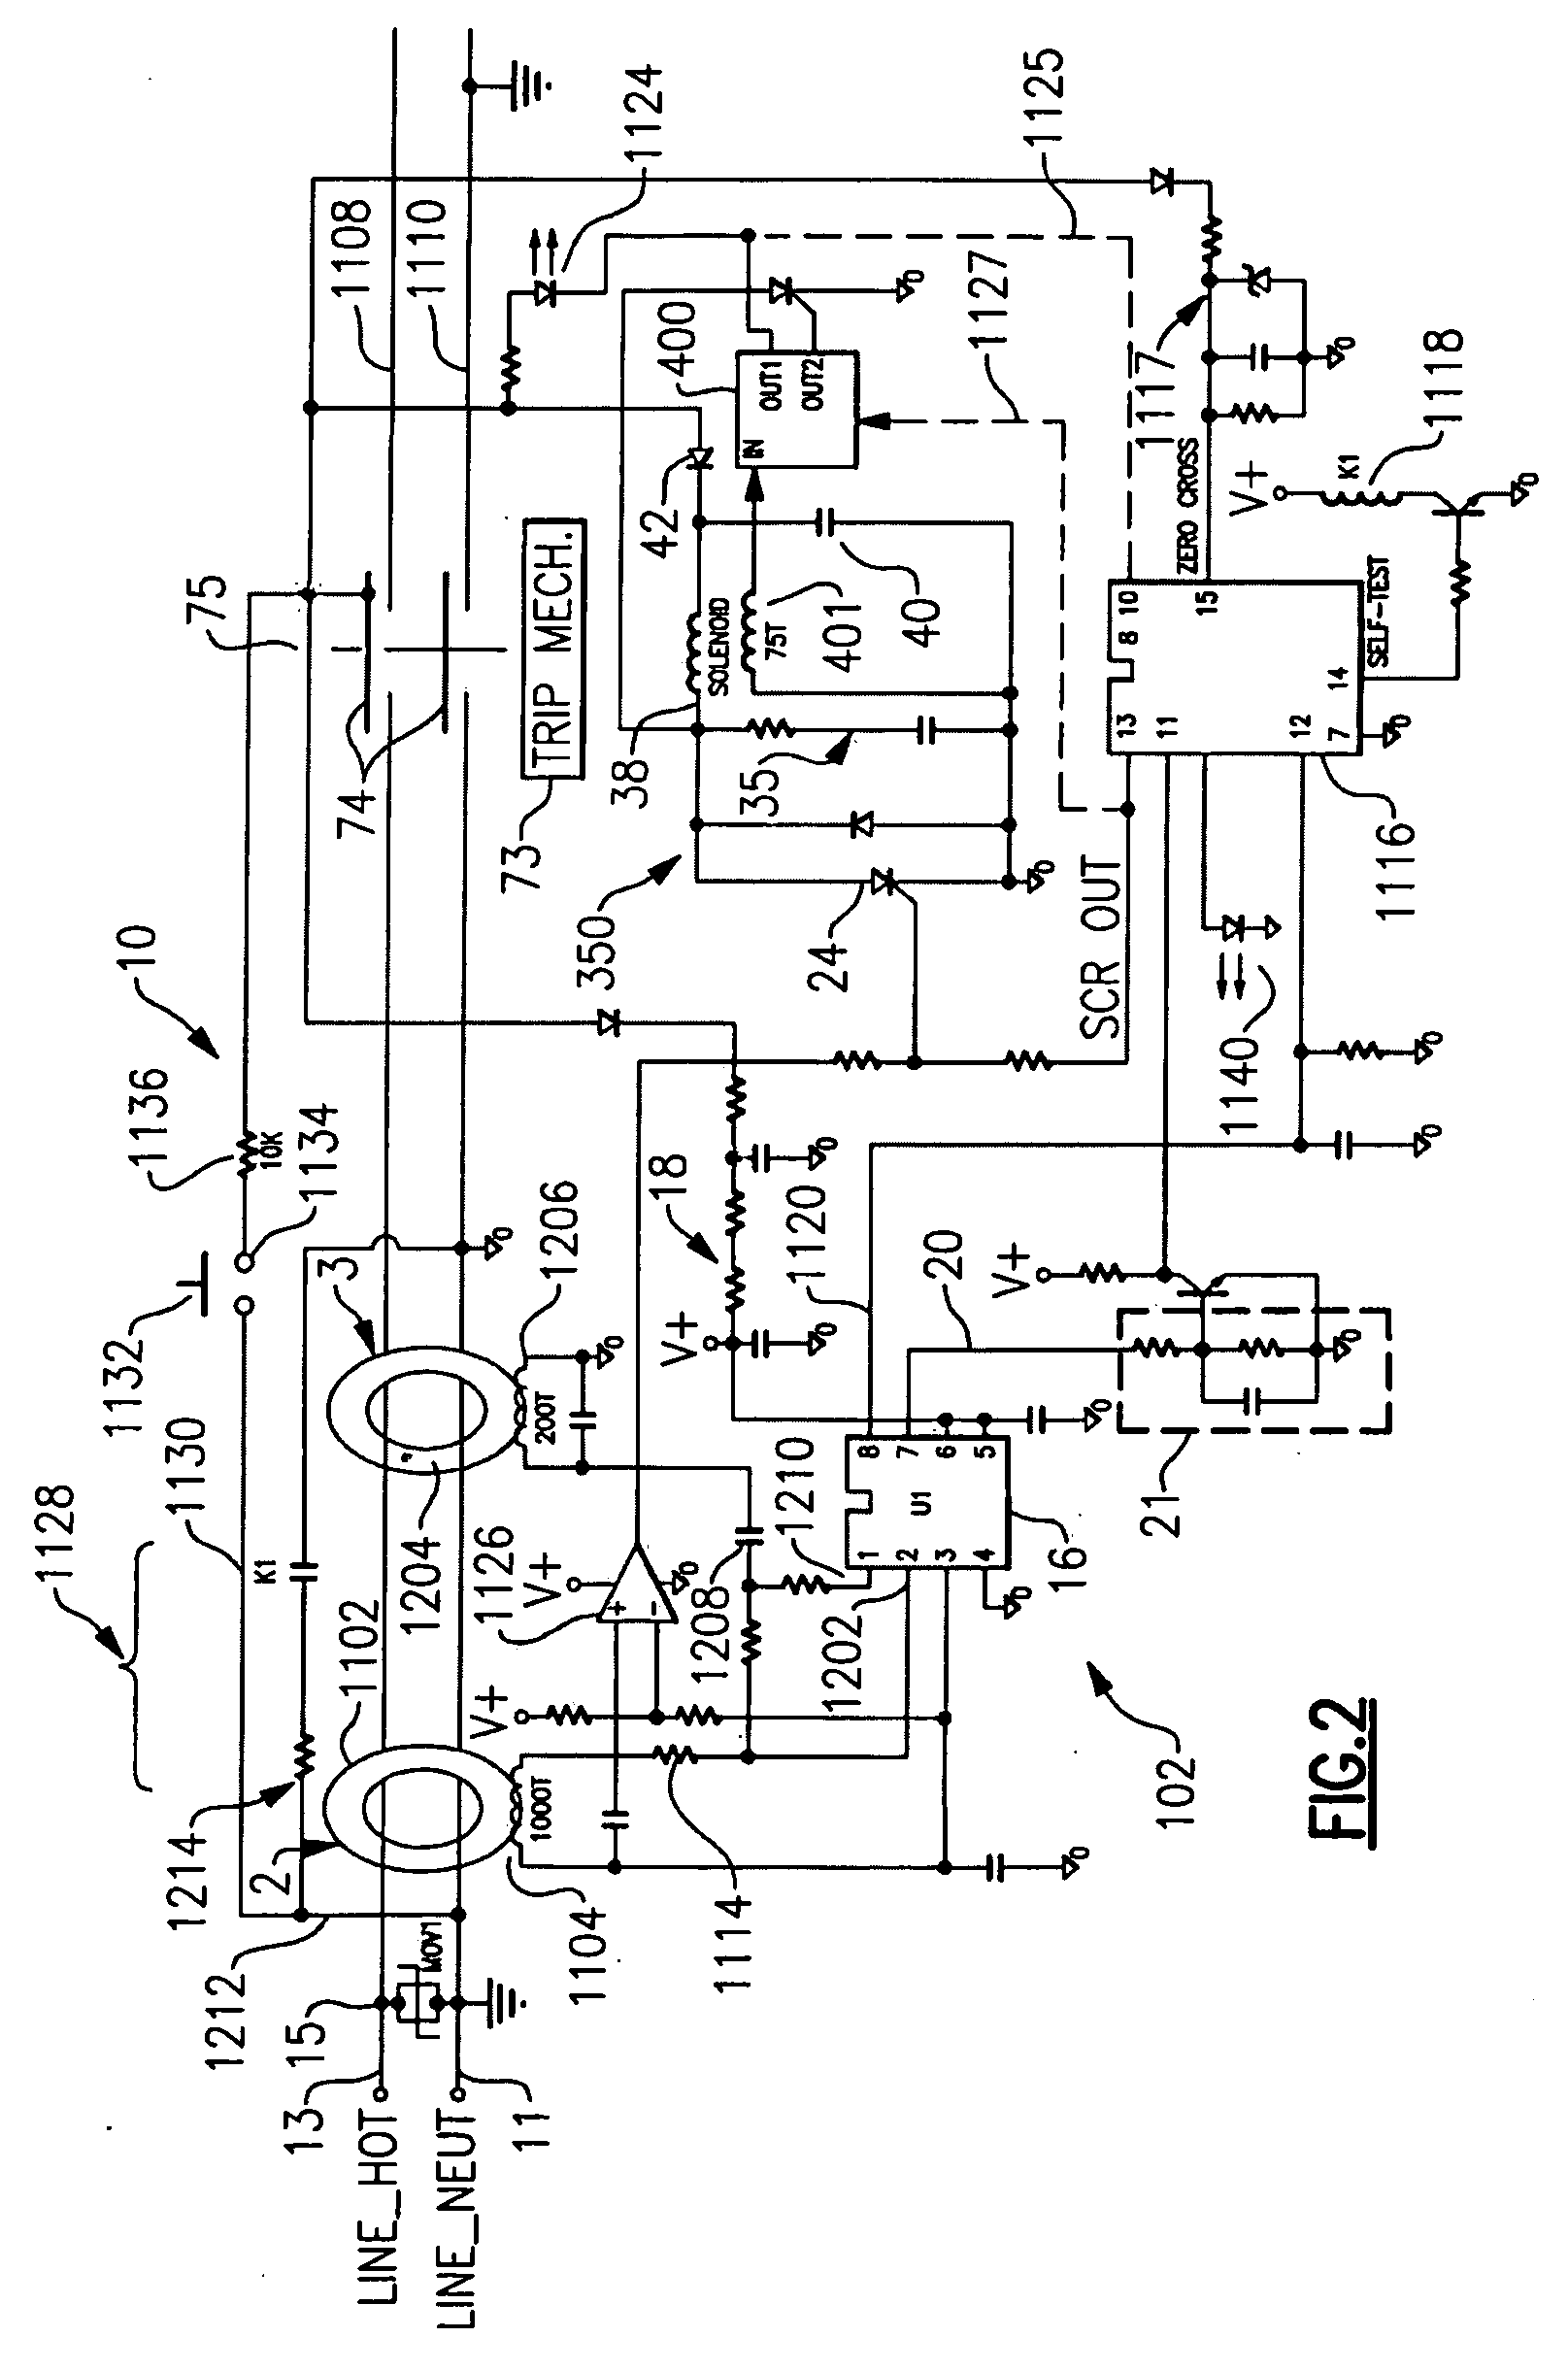 Protective Device with End-Of-Life Indication Before Power Denial